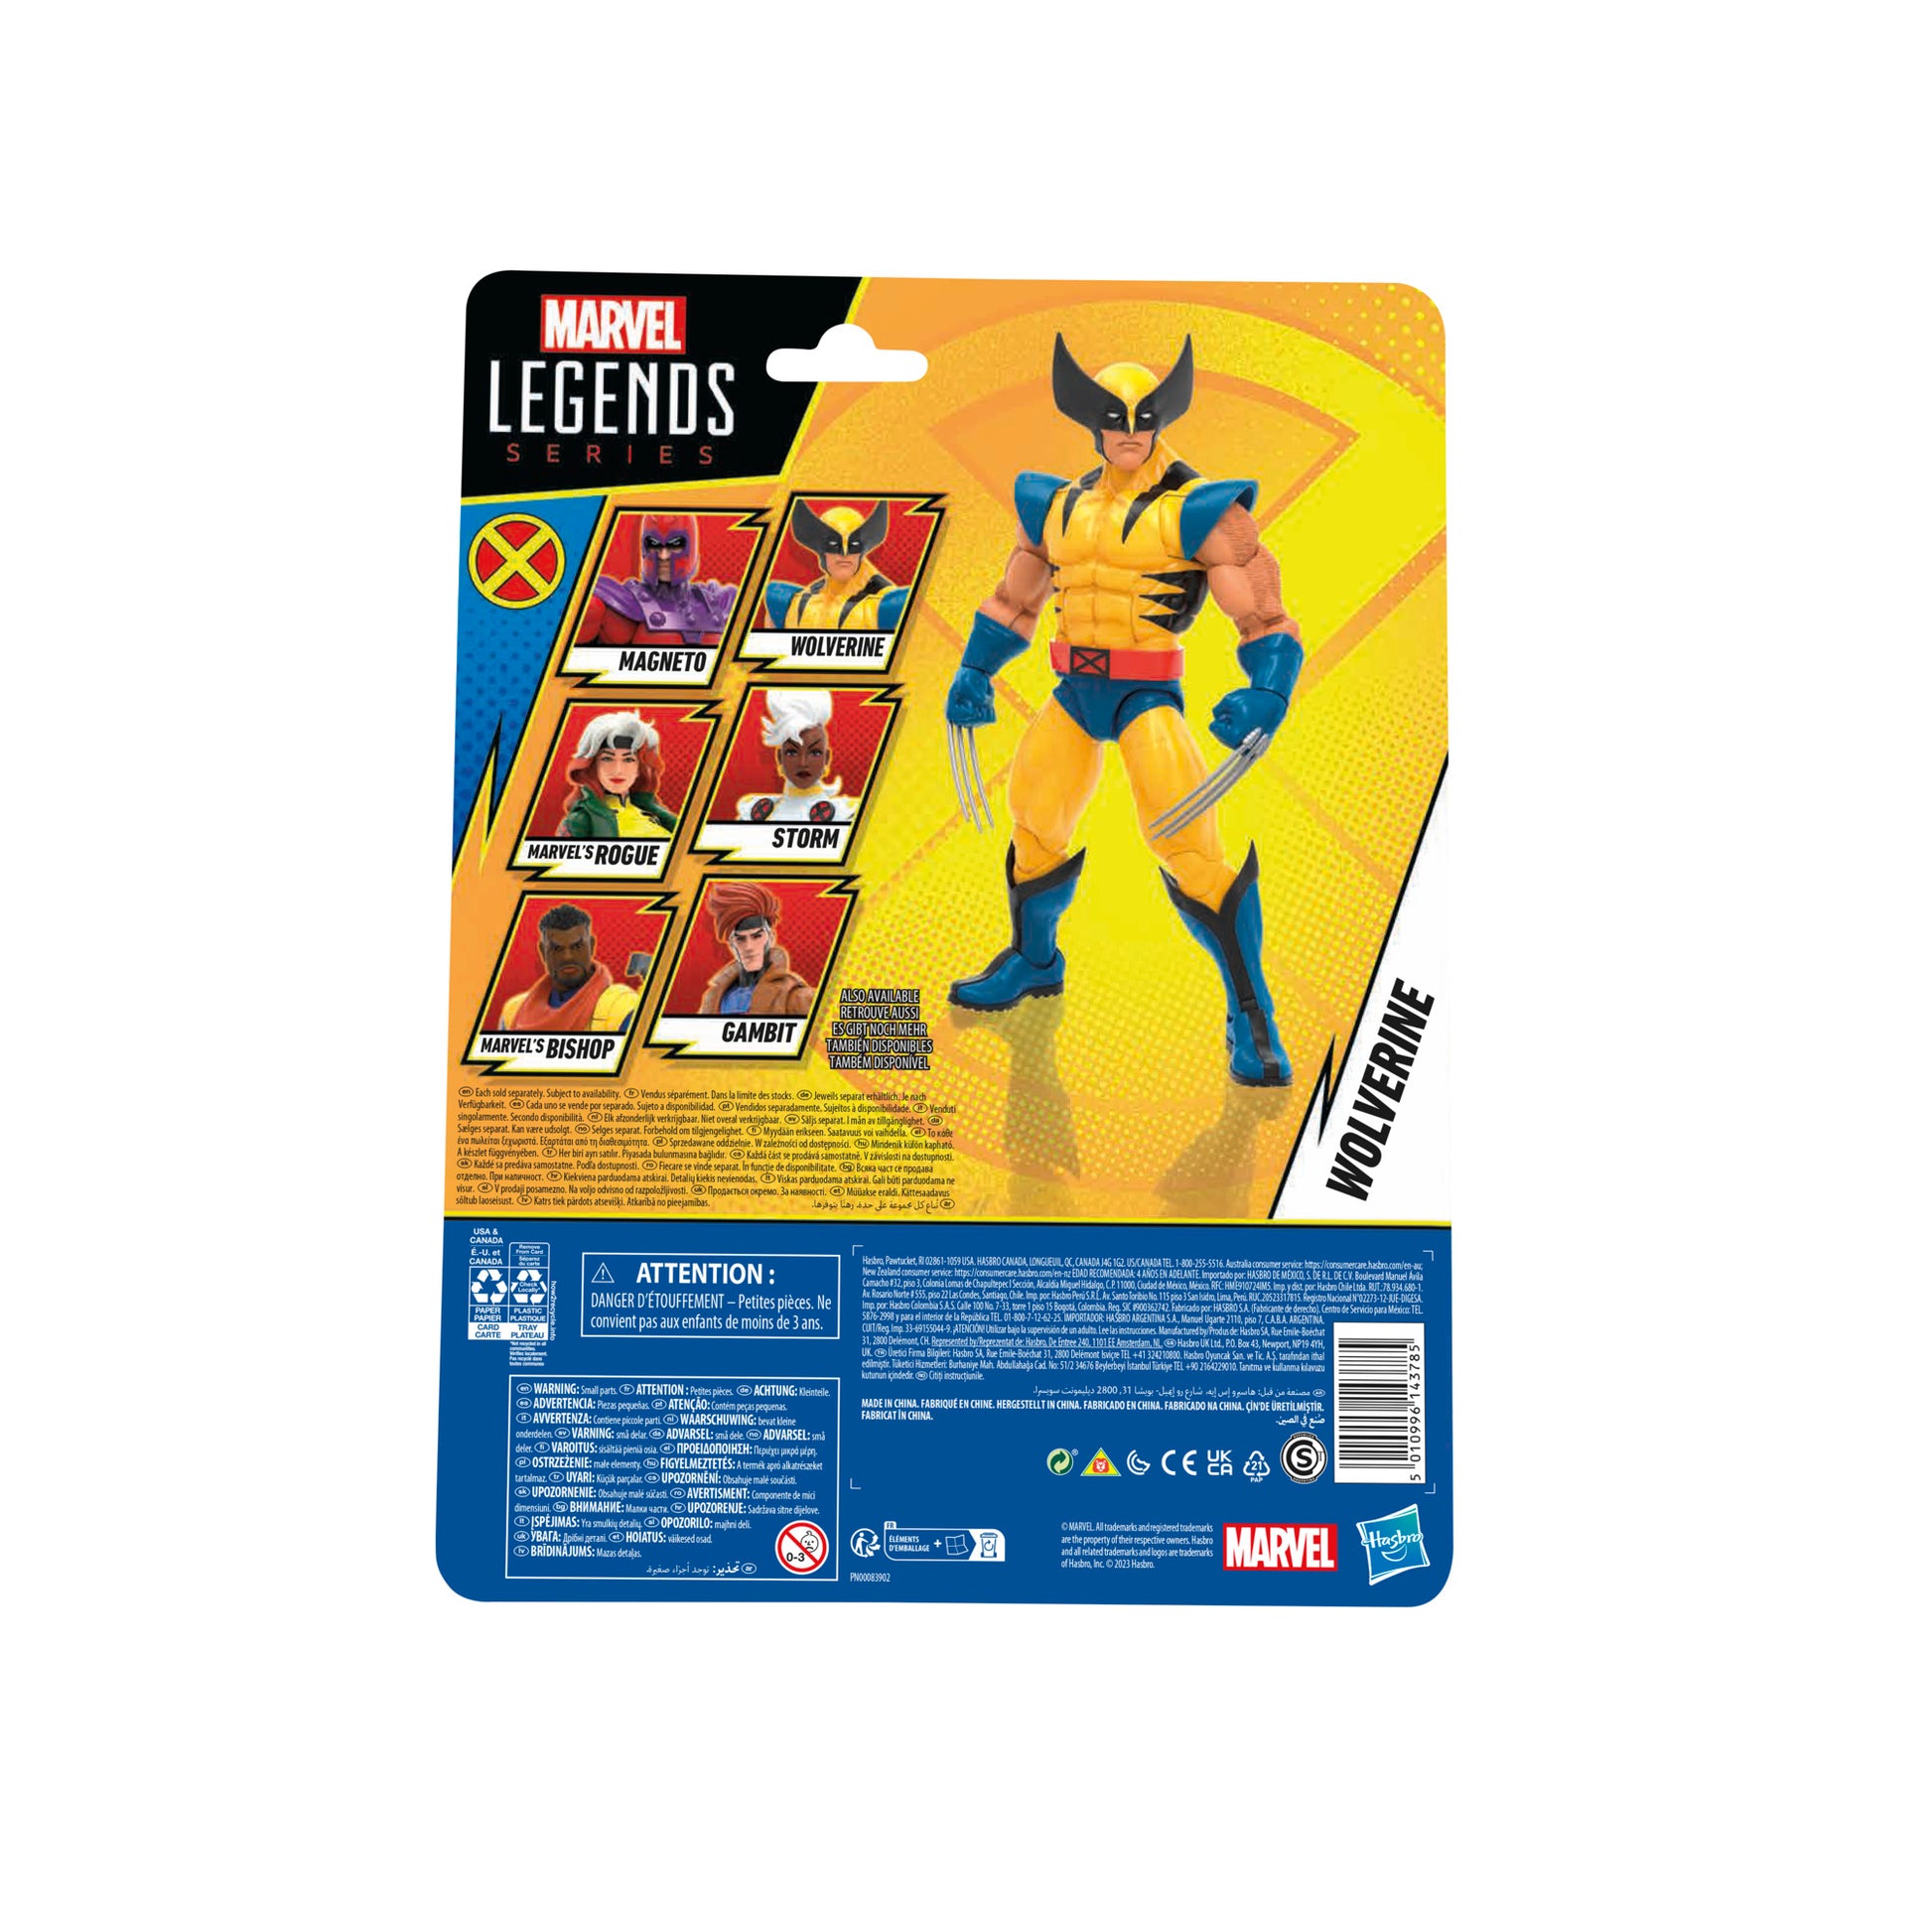 Hasbro Marvel Legends Series Wolverine Action Figure Toy in a box back view - Heretoserveyou